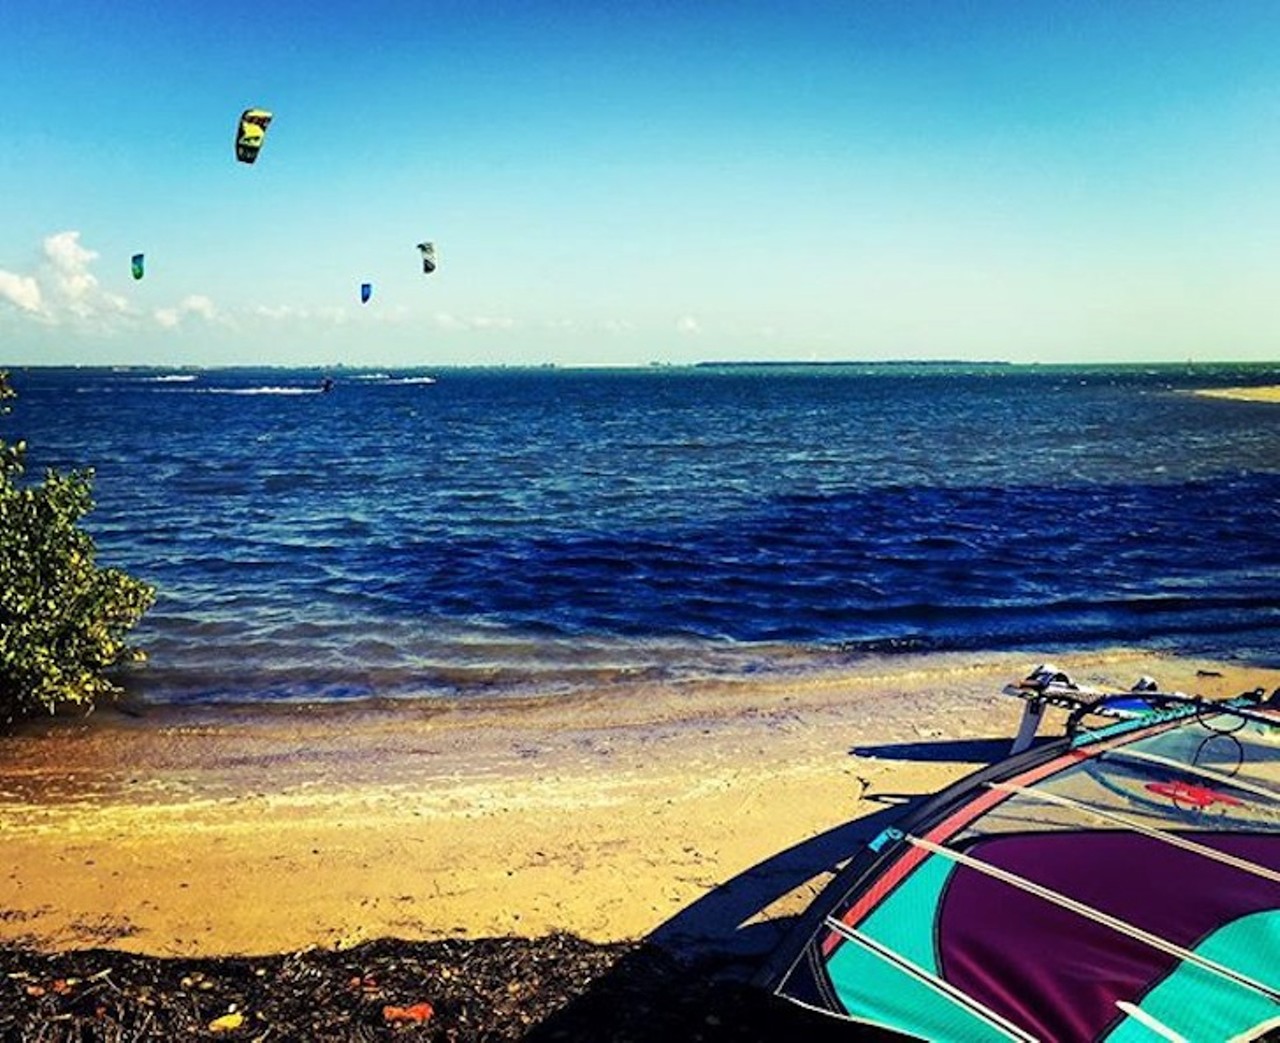 Pass-a-Grille Beach
Take a break from all the happenings in St. Pete for a laid back day at Pass-a-Grille. This beach is great for dolphin-watching just off shore. Stick around to watch them ring the town bell, which is a nice little daily tradition.
2 hours and 16 minutes
Photo via blankaonthebeach/Instagram